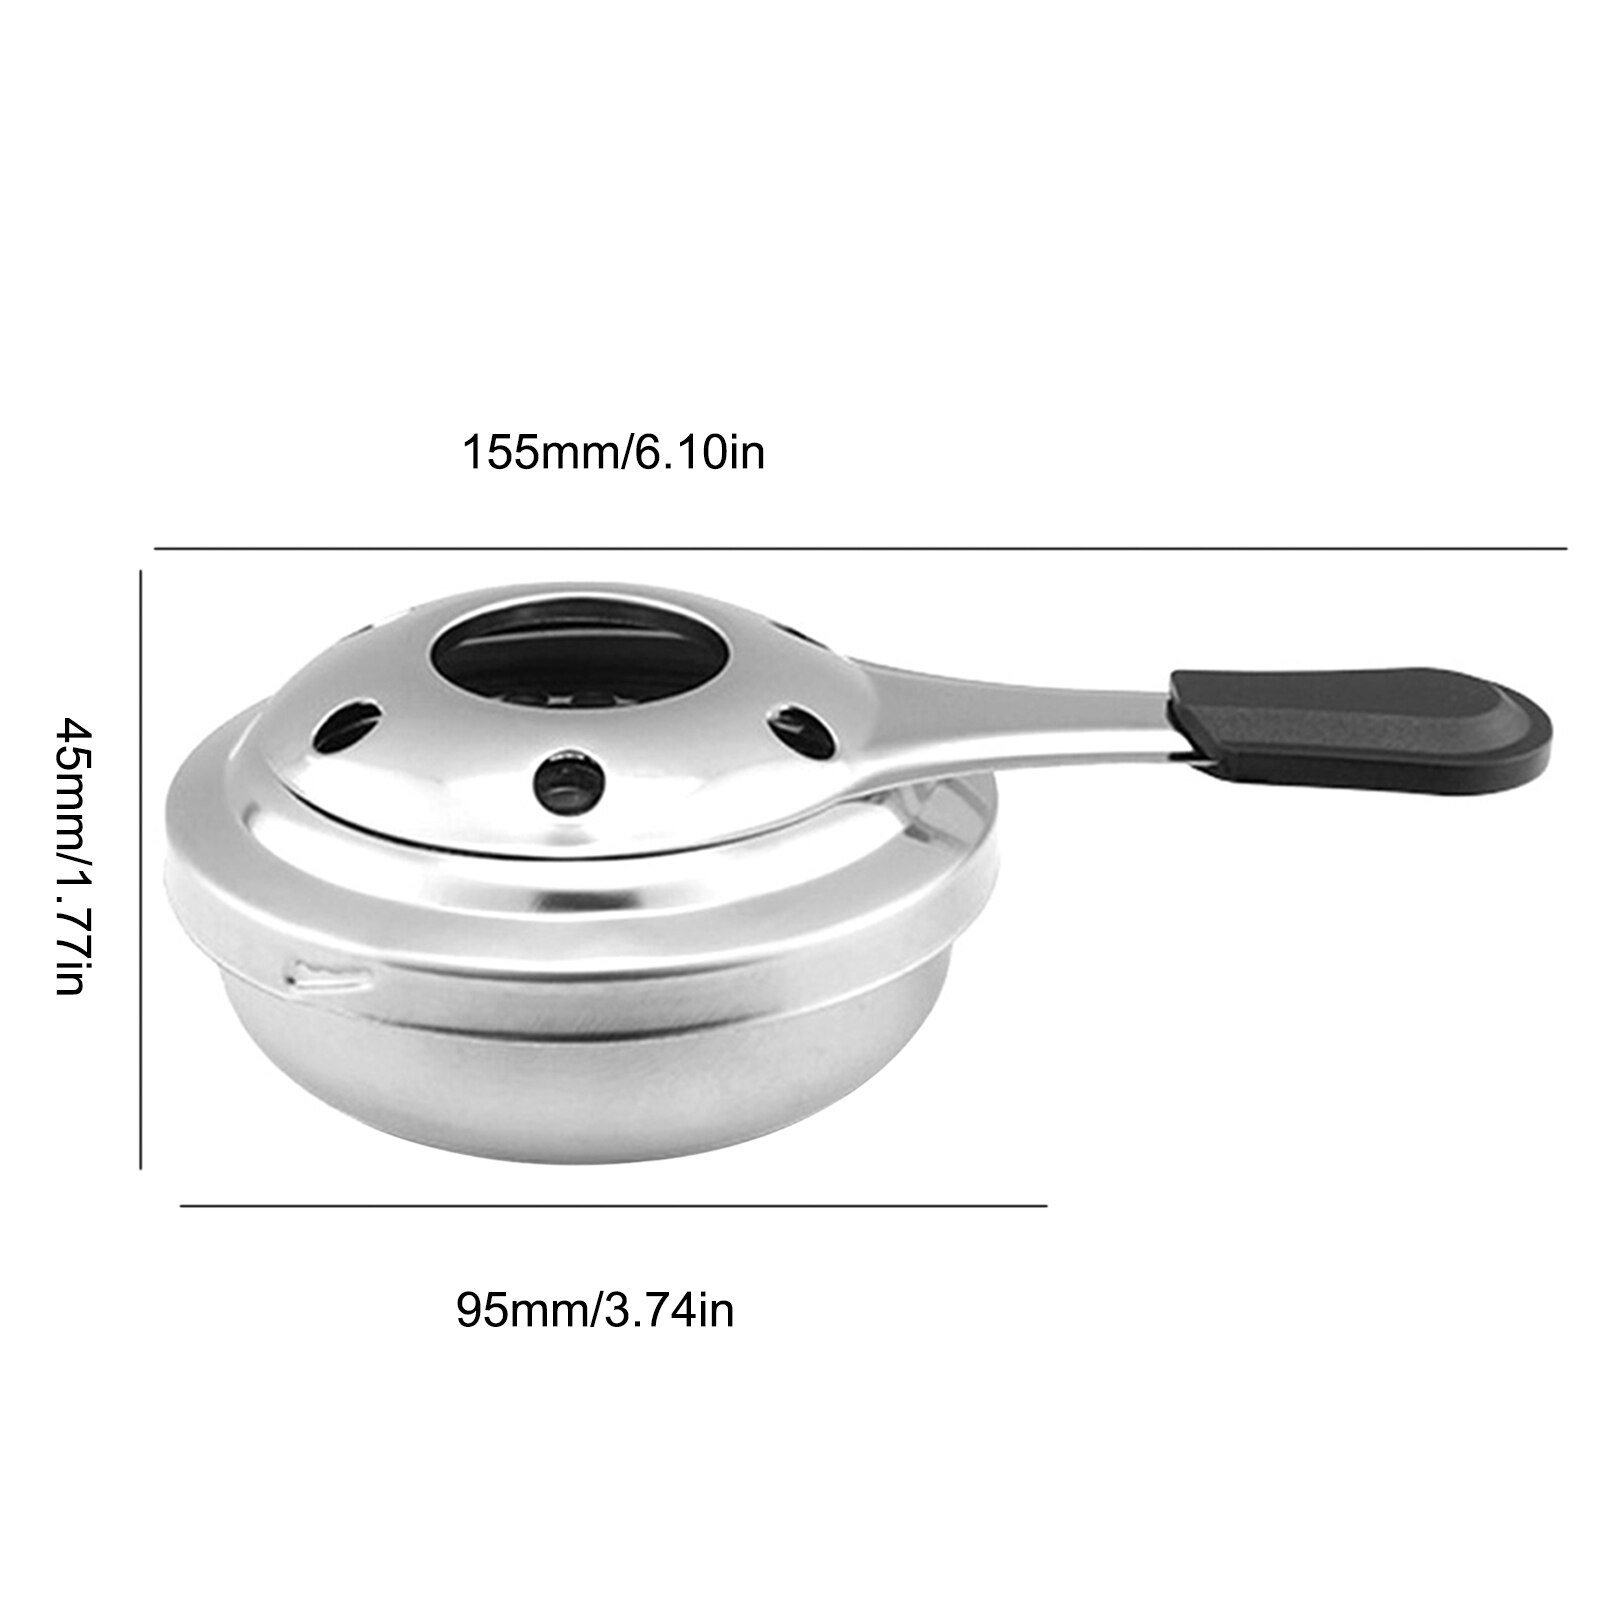 Stainless Steel Fondue Burner With Anti-scalding Handle Portable Mini Cheese Fondue Pot Alcohol Burner Kitchen Accessories